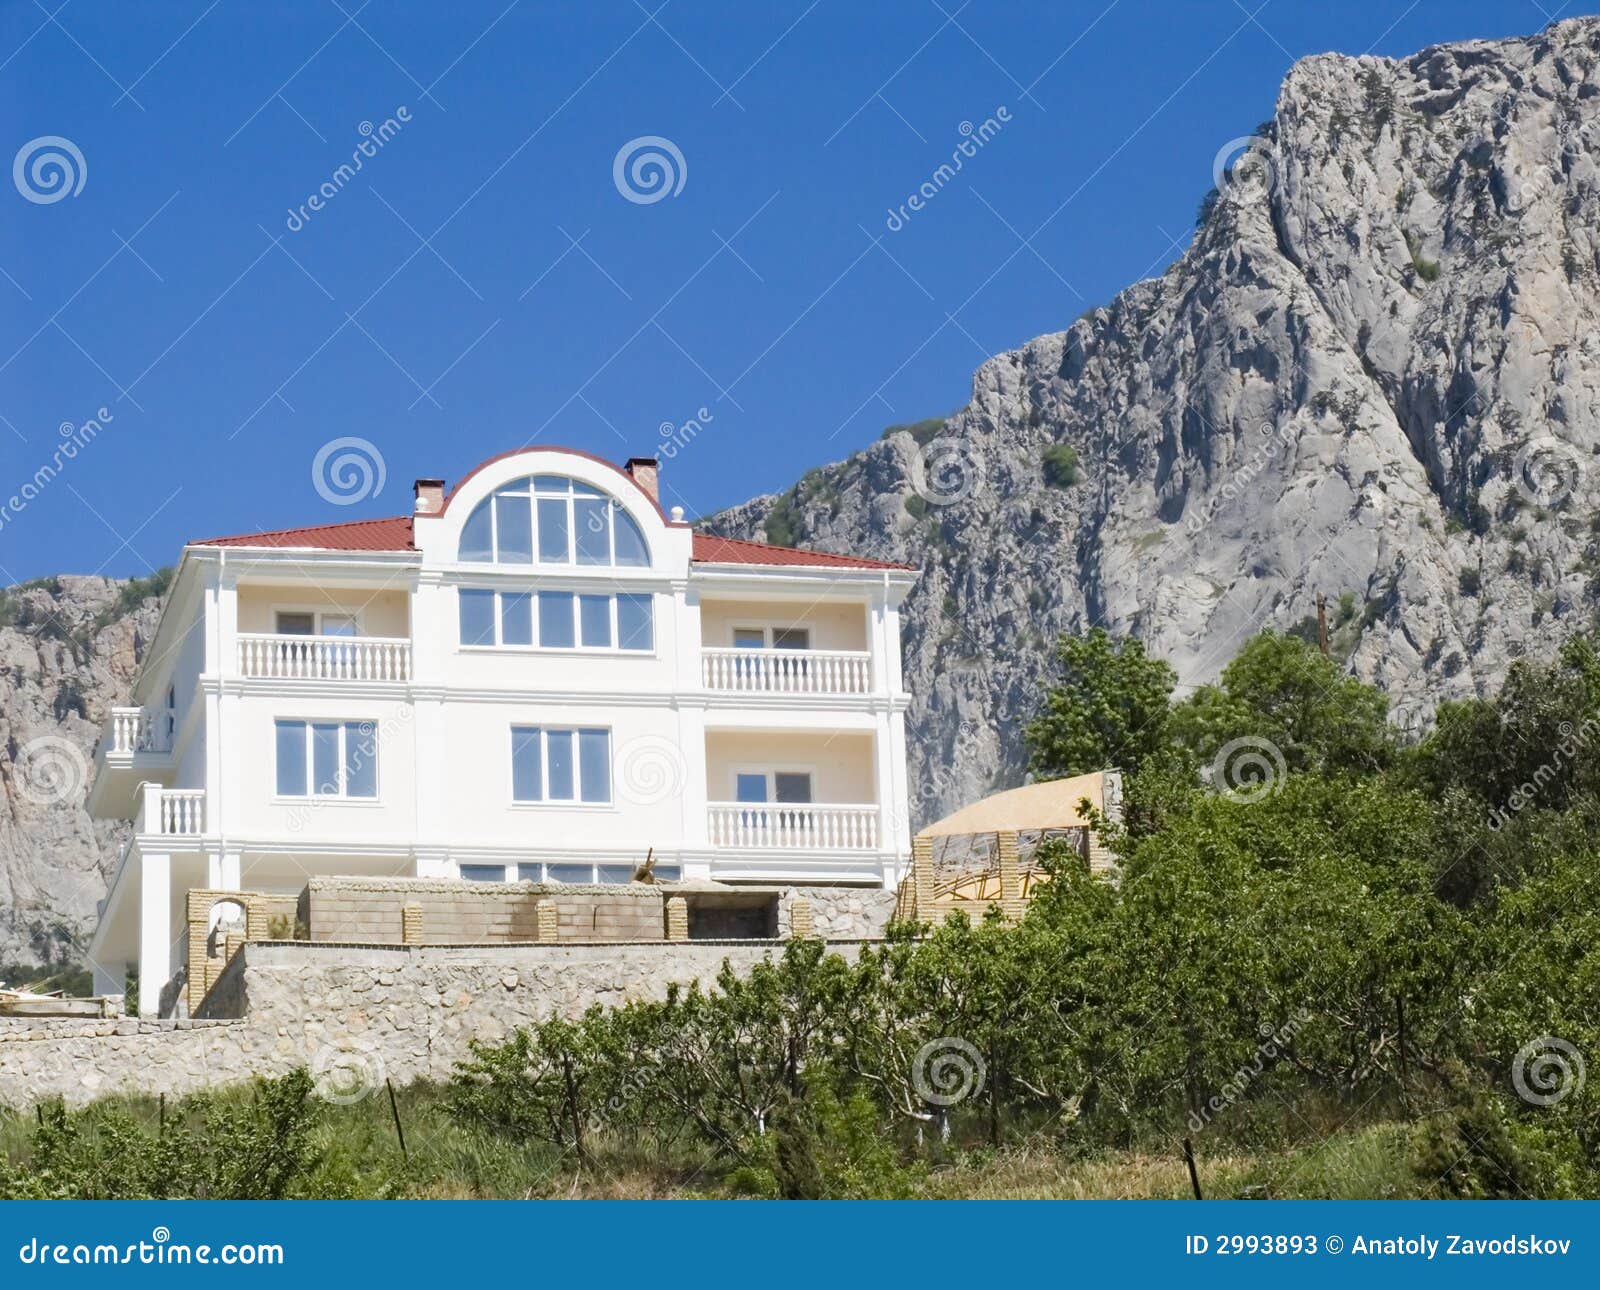 Stone cottage in mountains stock image. Image of facade - 2993893